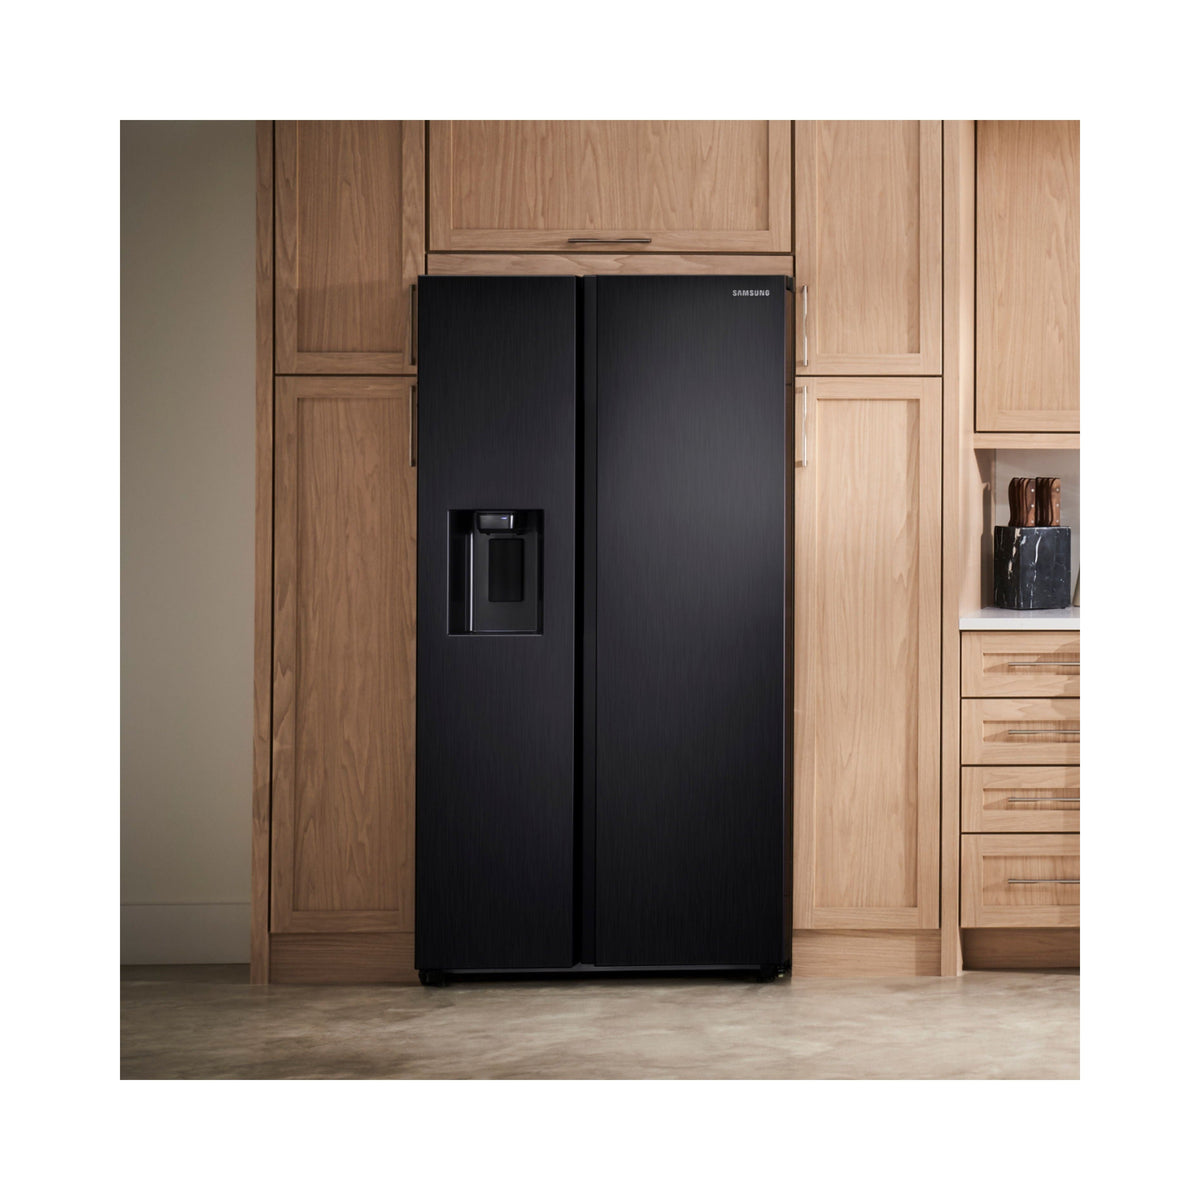 SAMSUNG RS22T5201SG/AA 22 cu. ft. Counter Depth Refrigerator in Black Stainless Steel